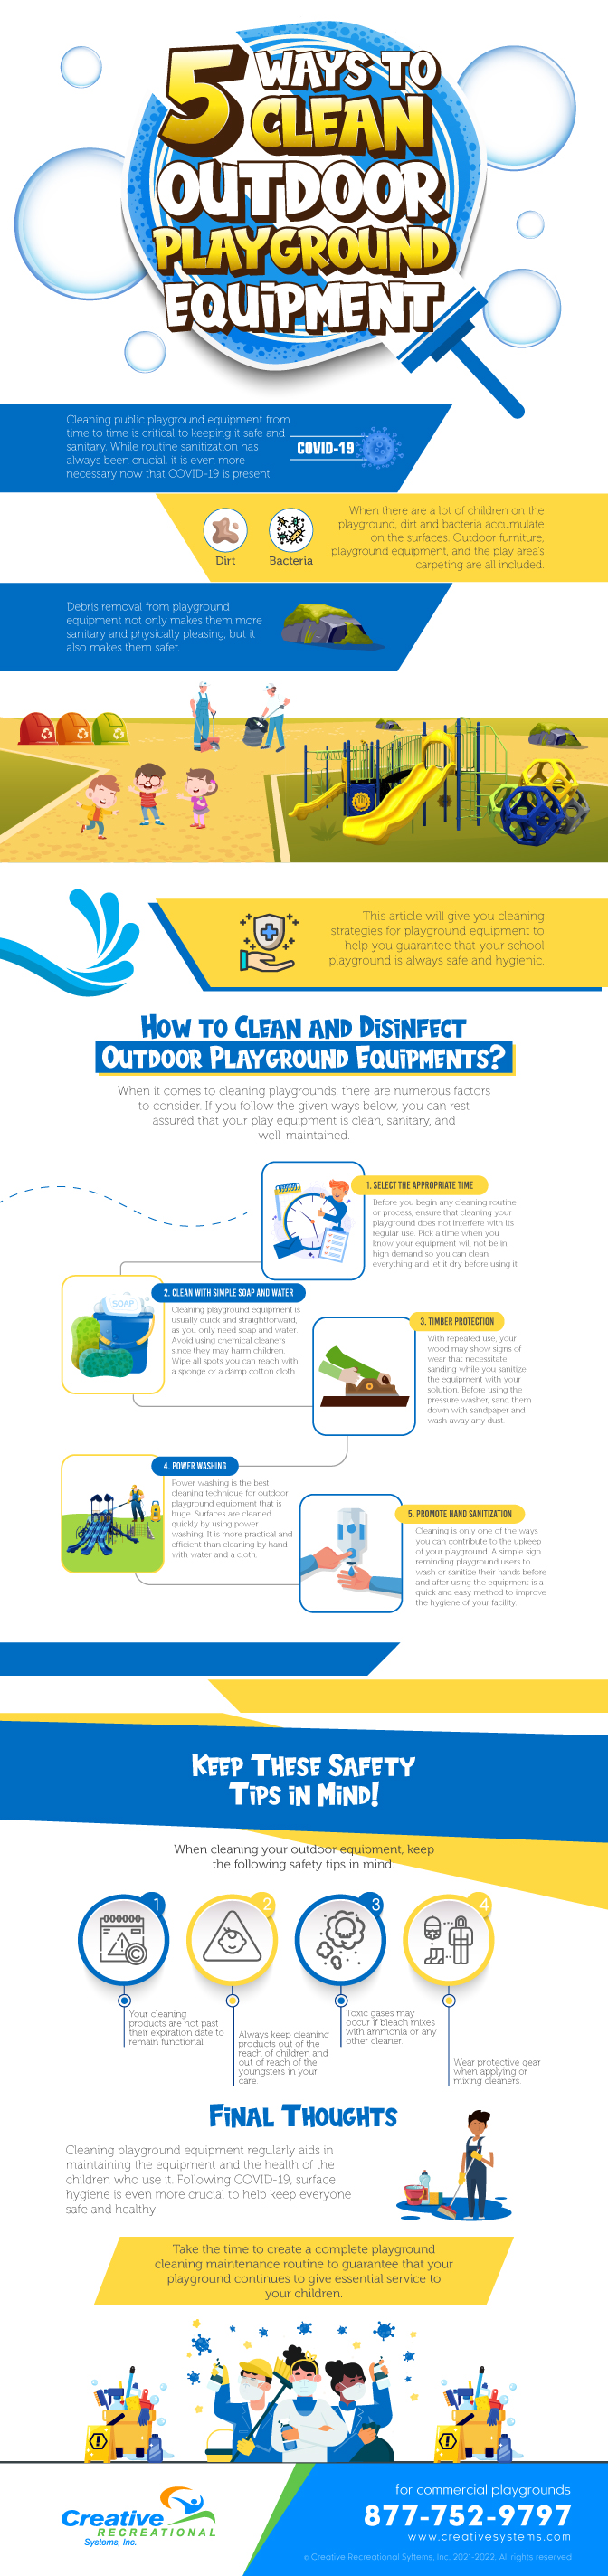 Explore ways to clean the outdoor playground equipment